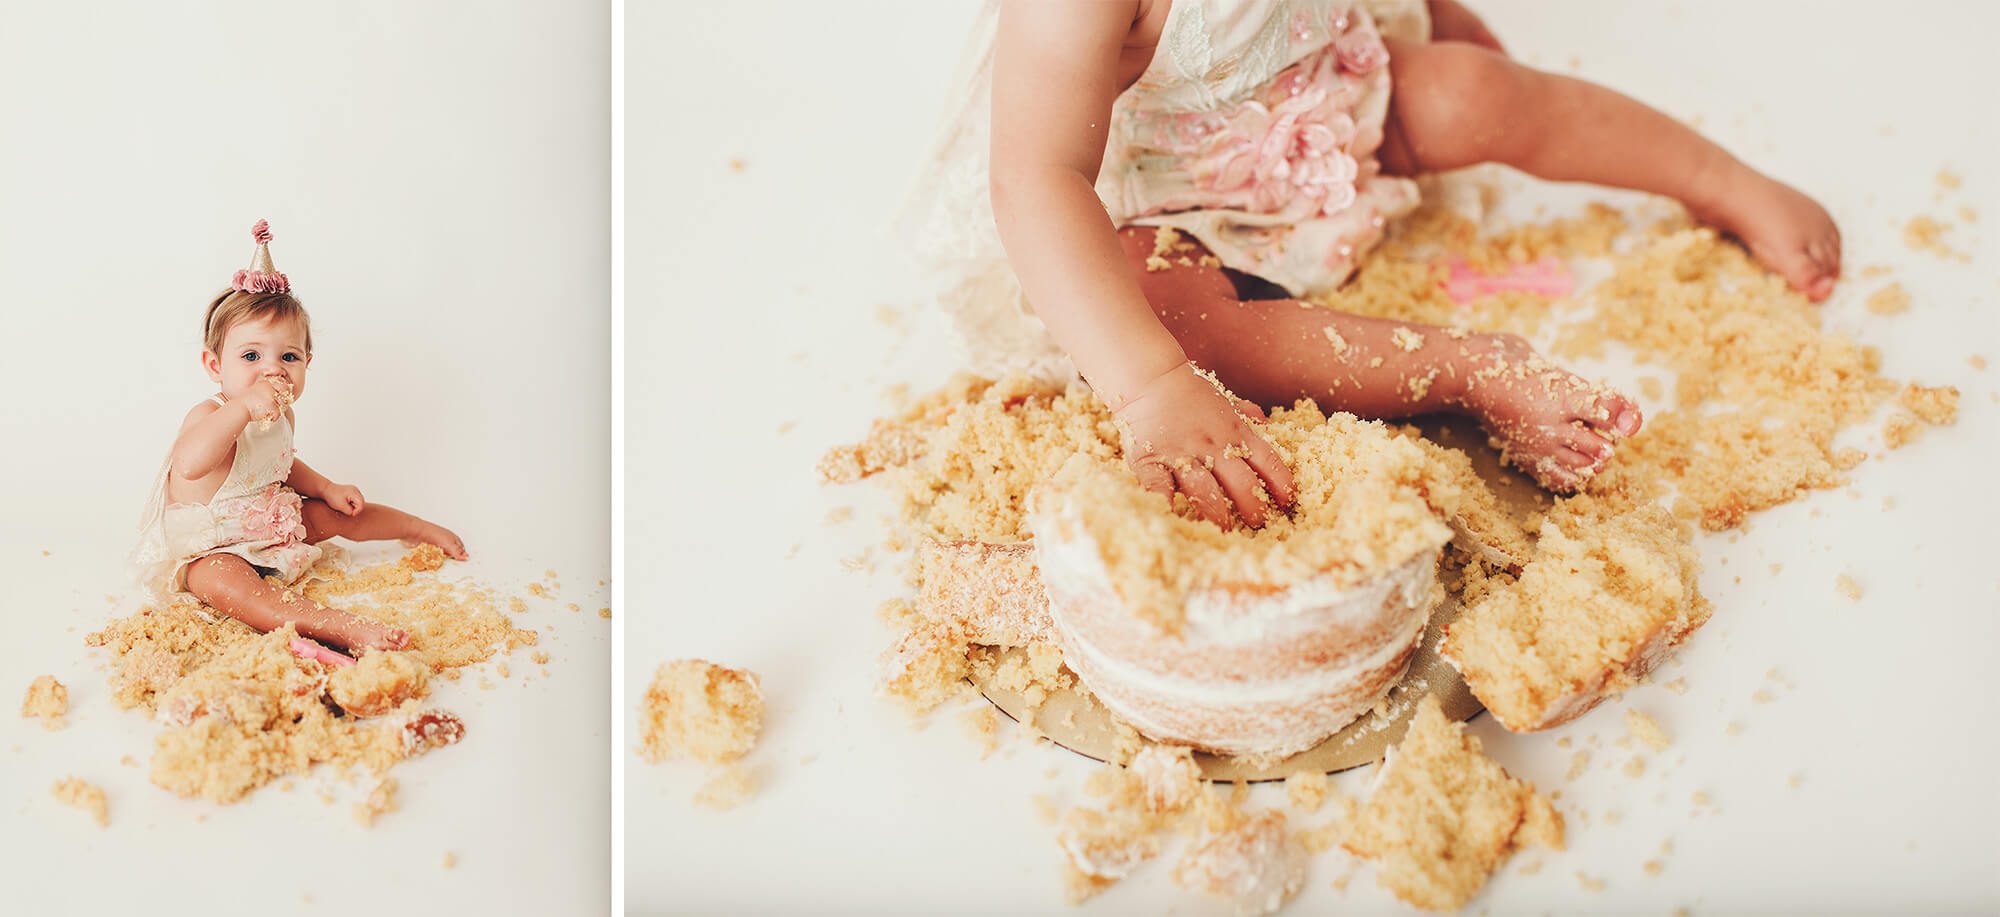 Alma has dug into her cake and it is everywhere, she is having so much fun during her cake smash session